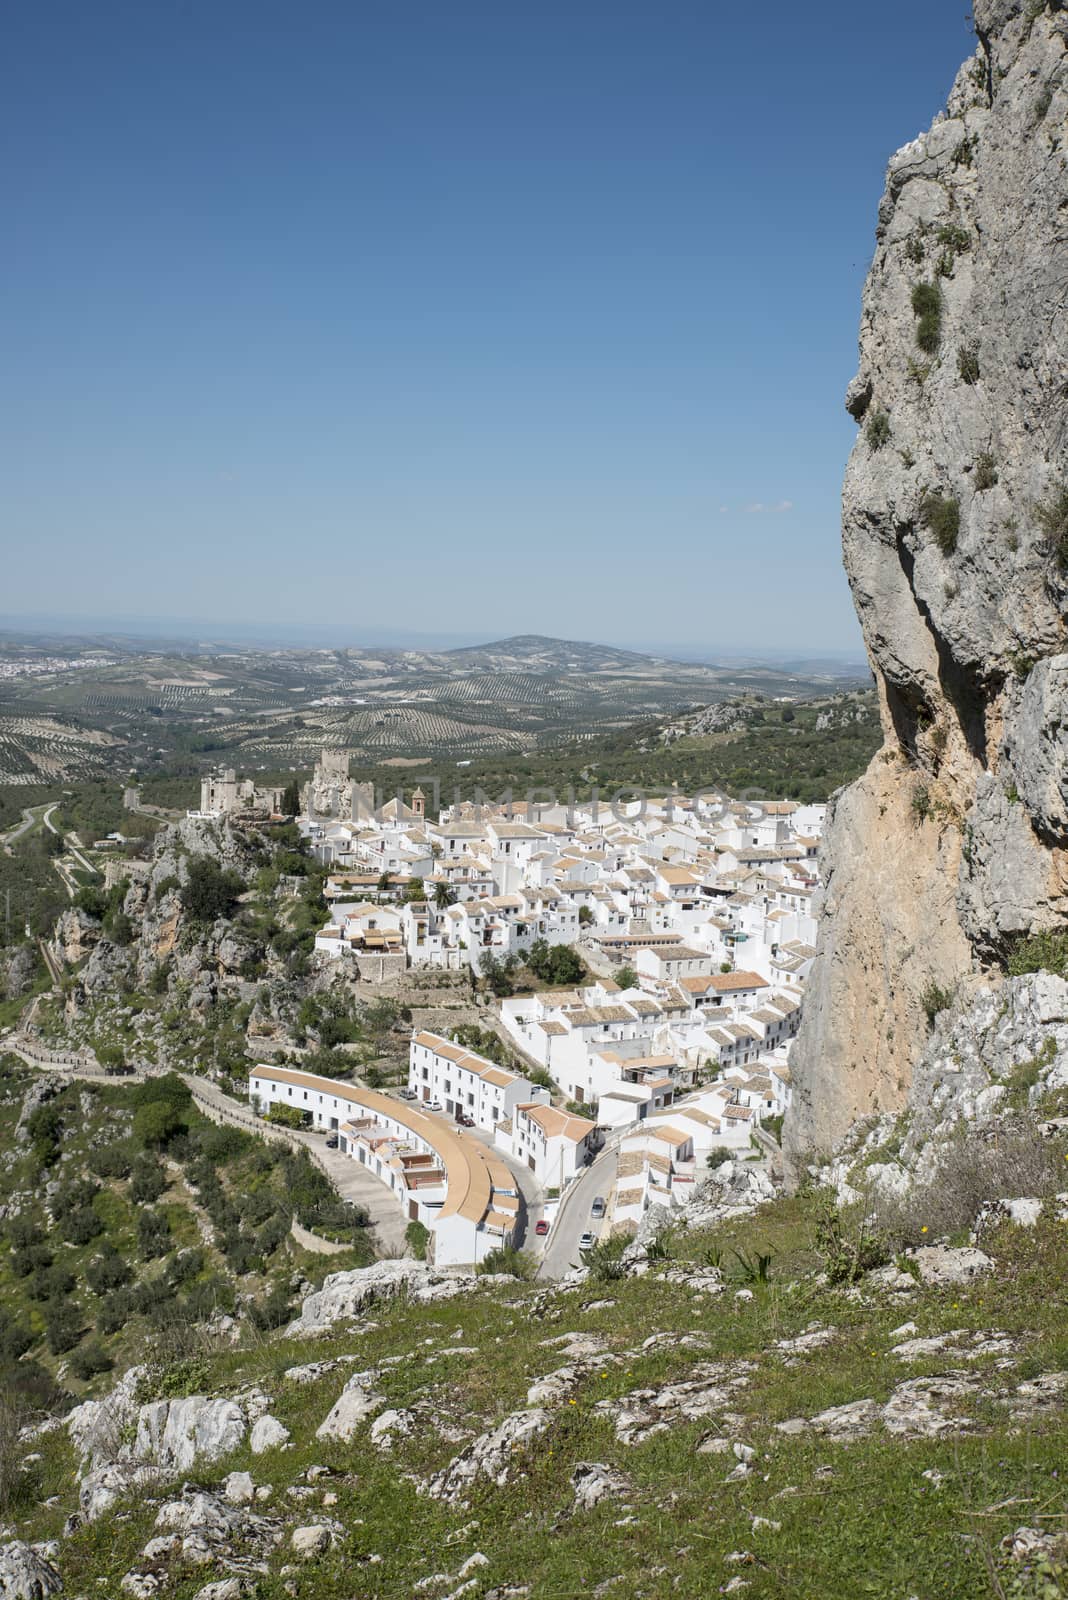 The Spanish village of zuheros in the mountains of Andalusia